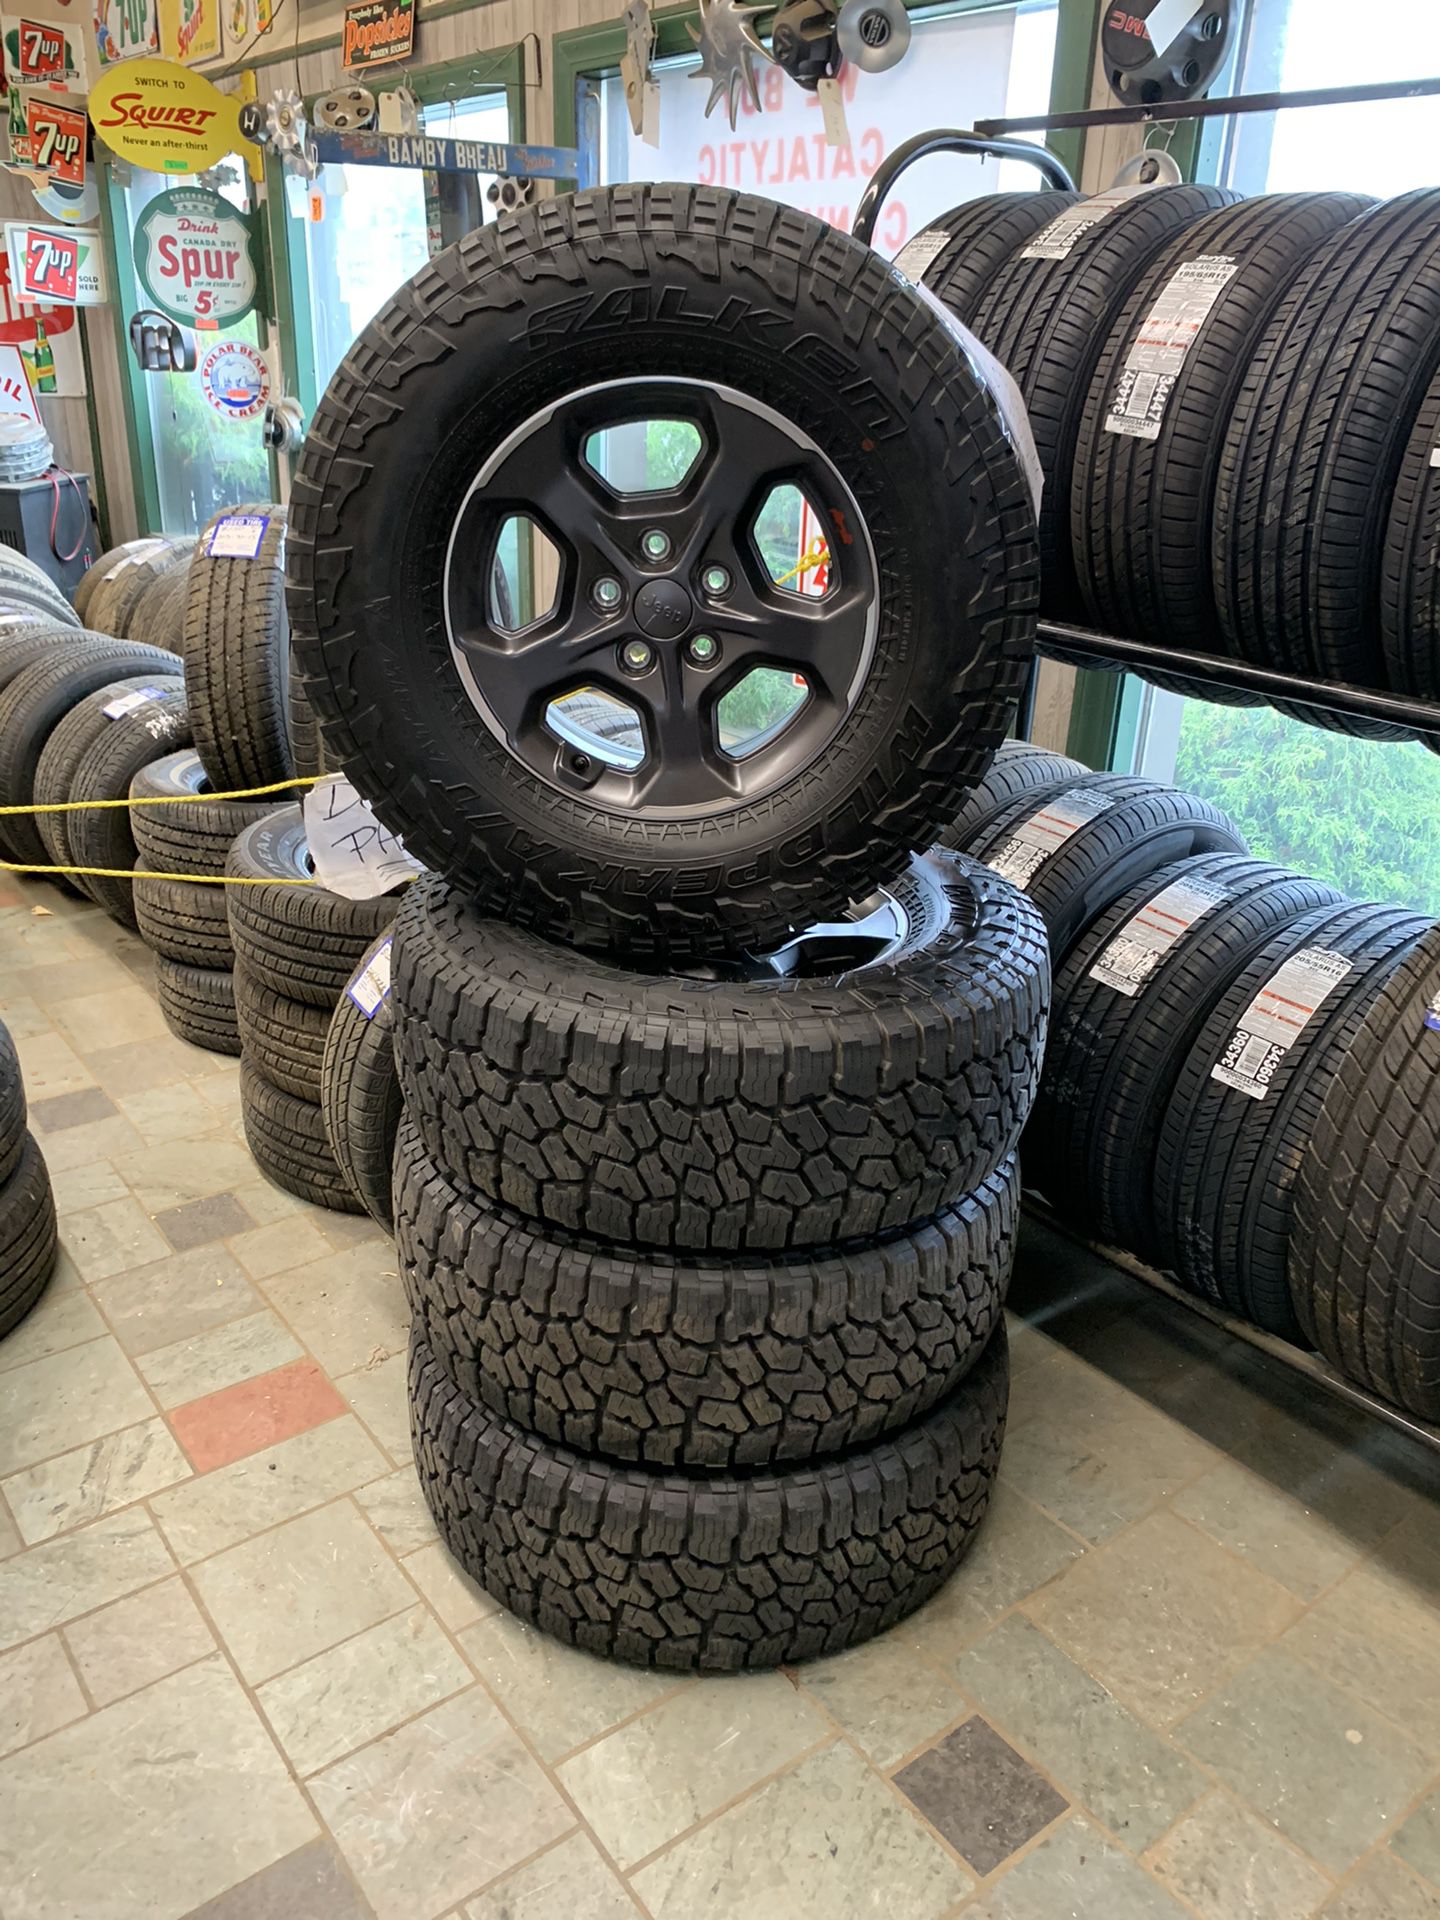 2021 Jeep gladiator wheels and tires